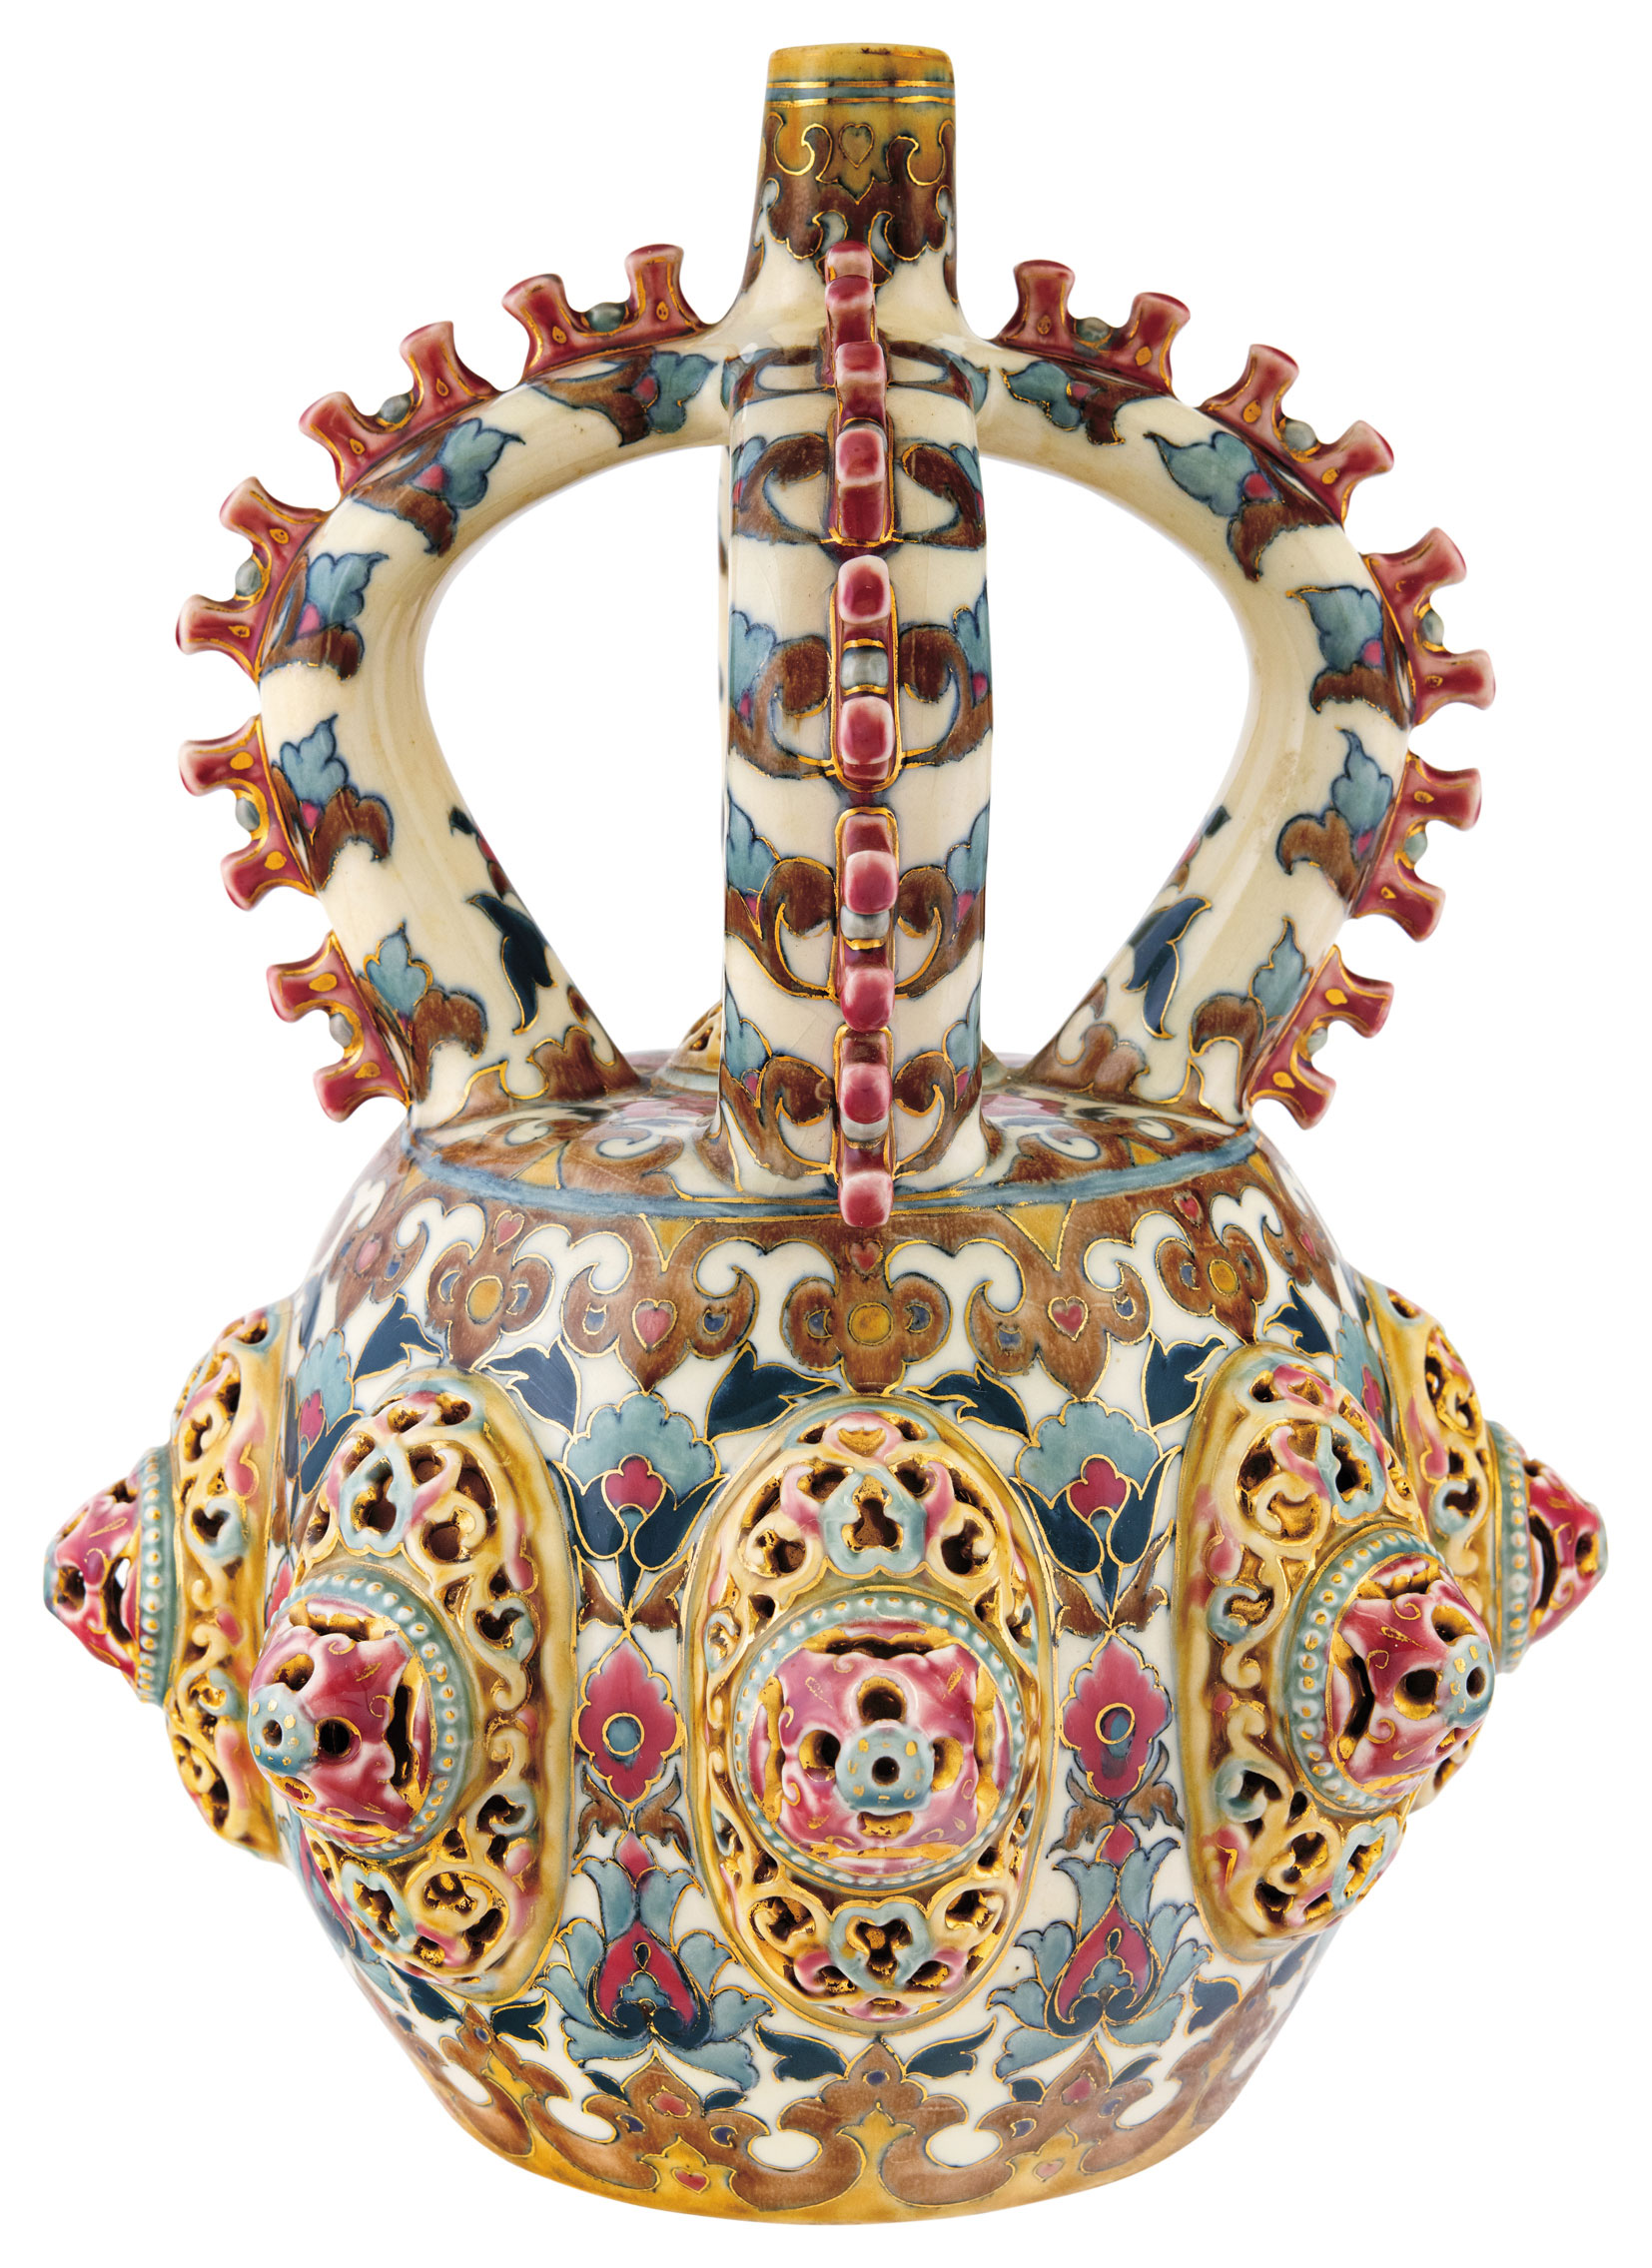 Zsolnay Decor Bowl with Crown-shaped Handles 1886